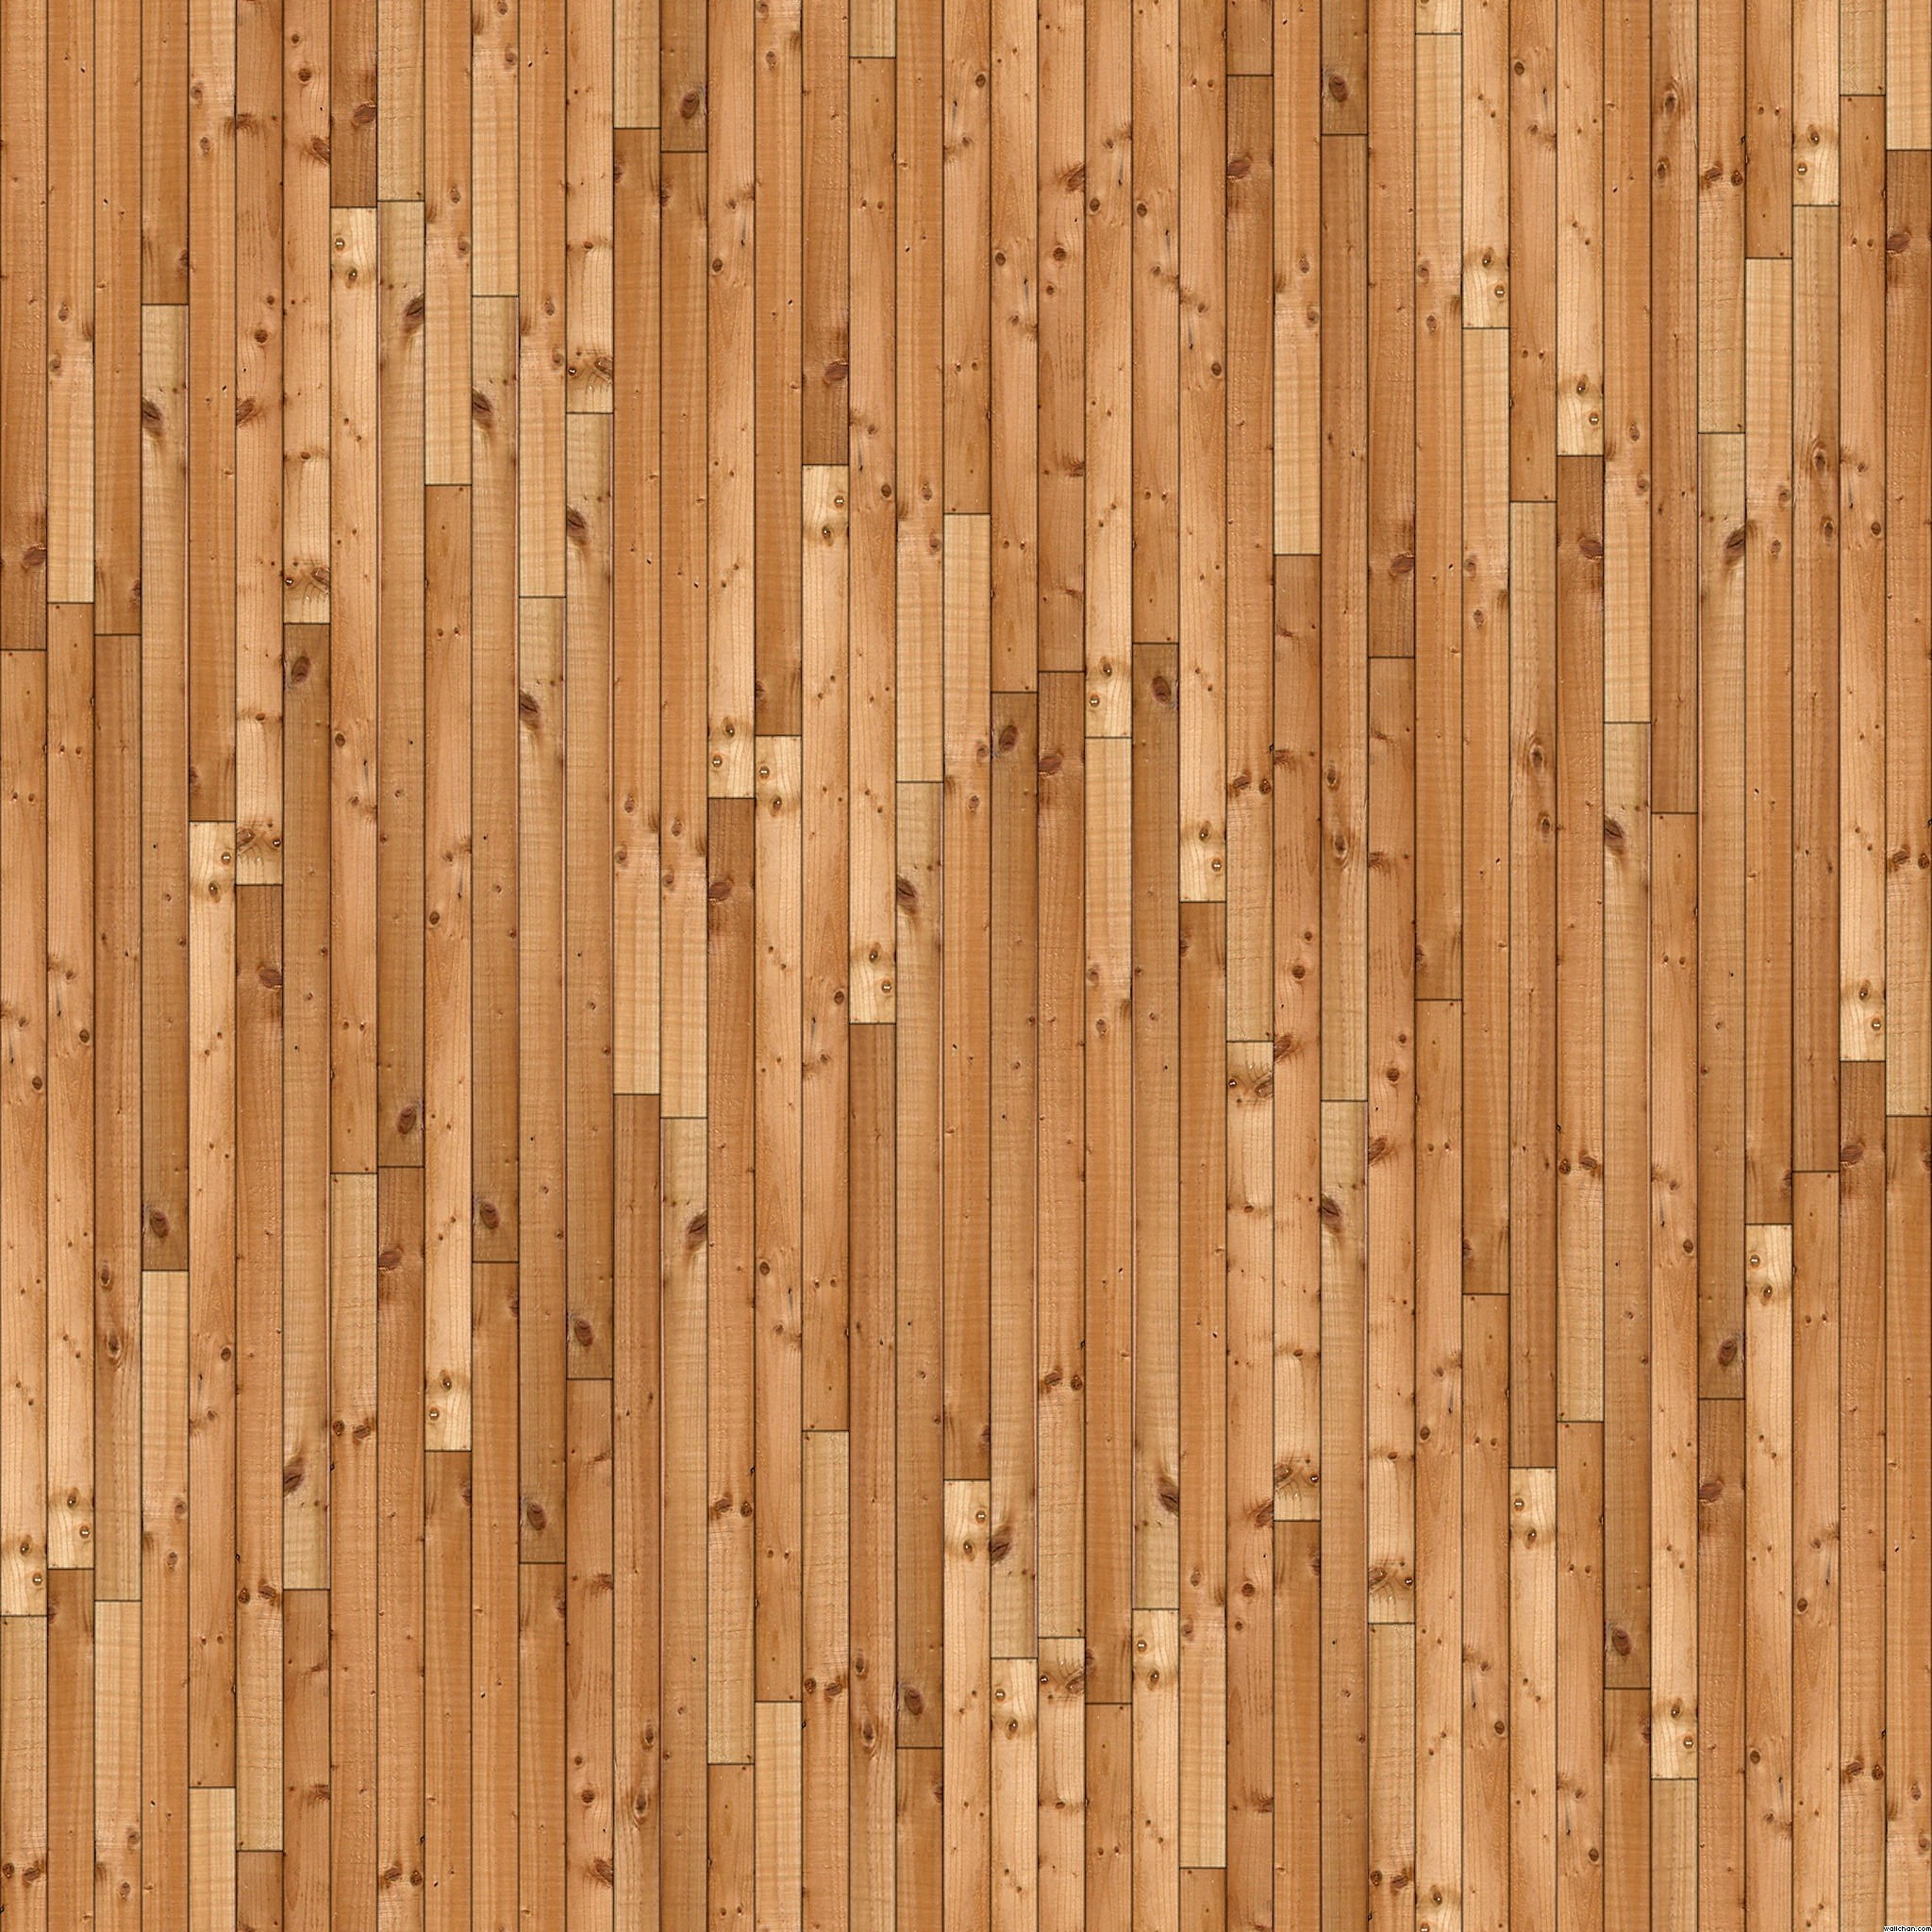 Newest iPad 3 wallpapers HD Textures Wallpapers Wood Texture